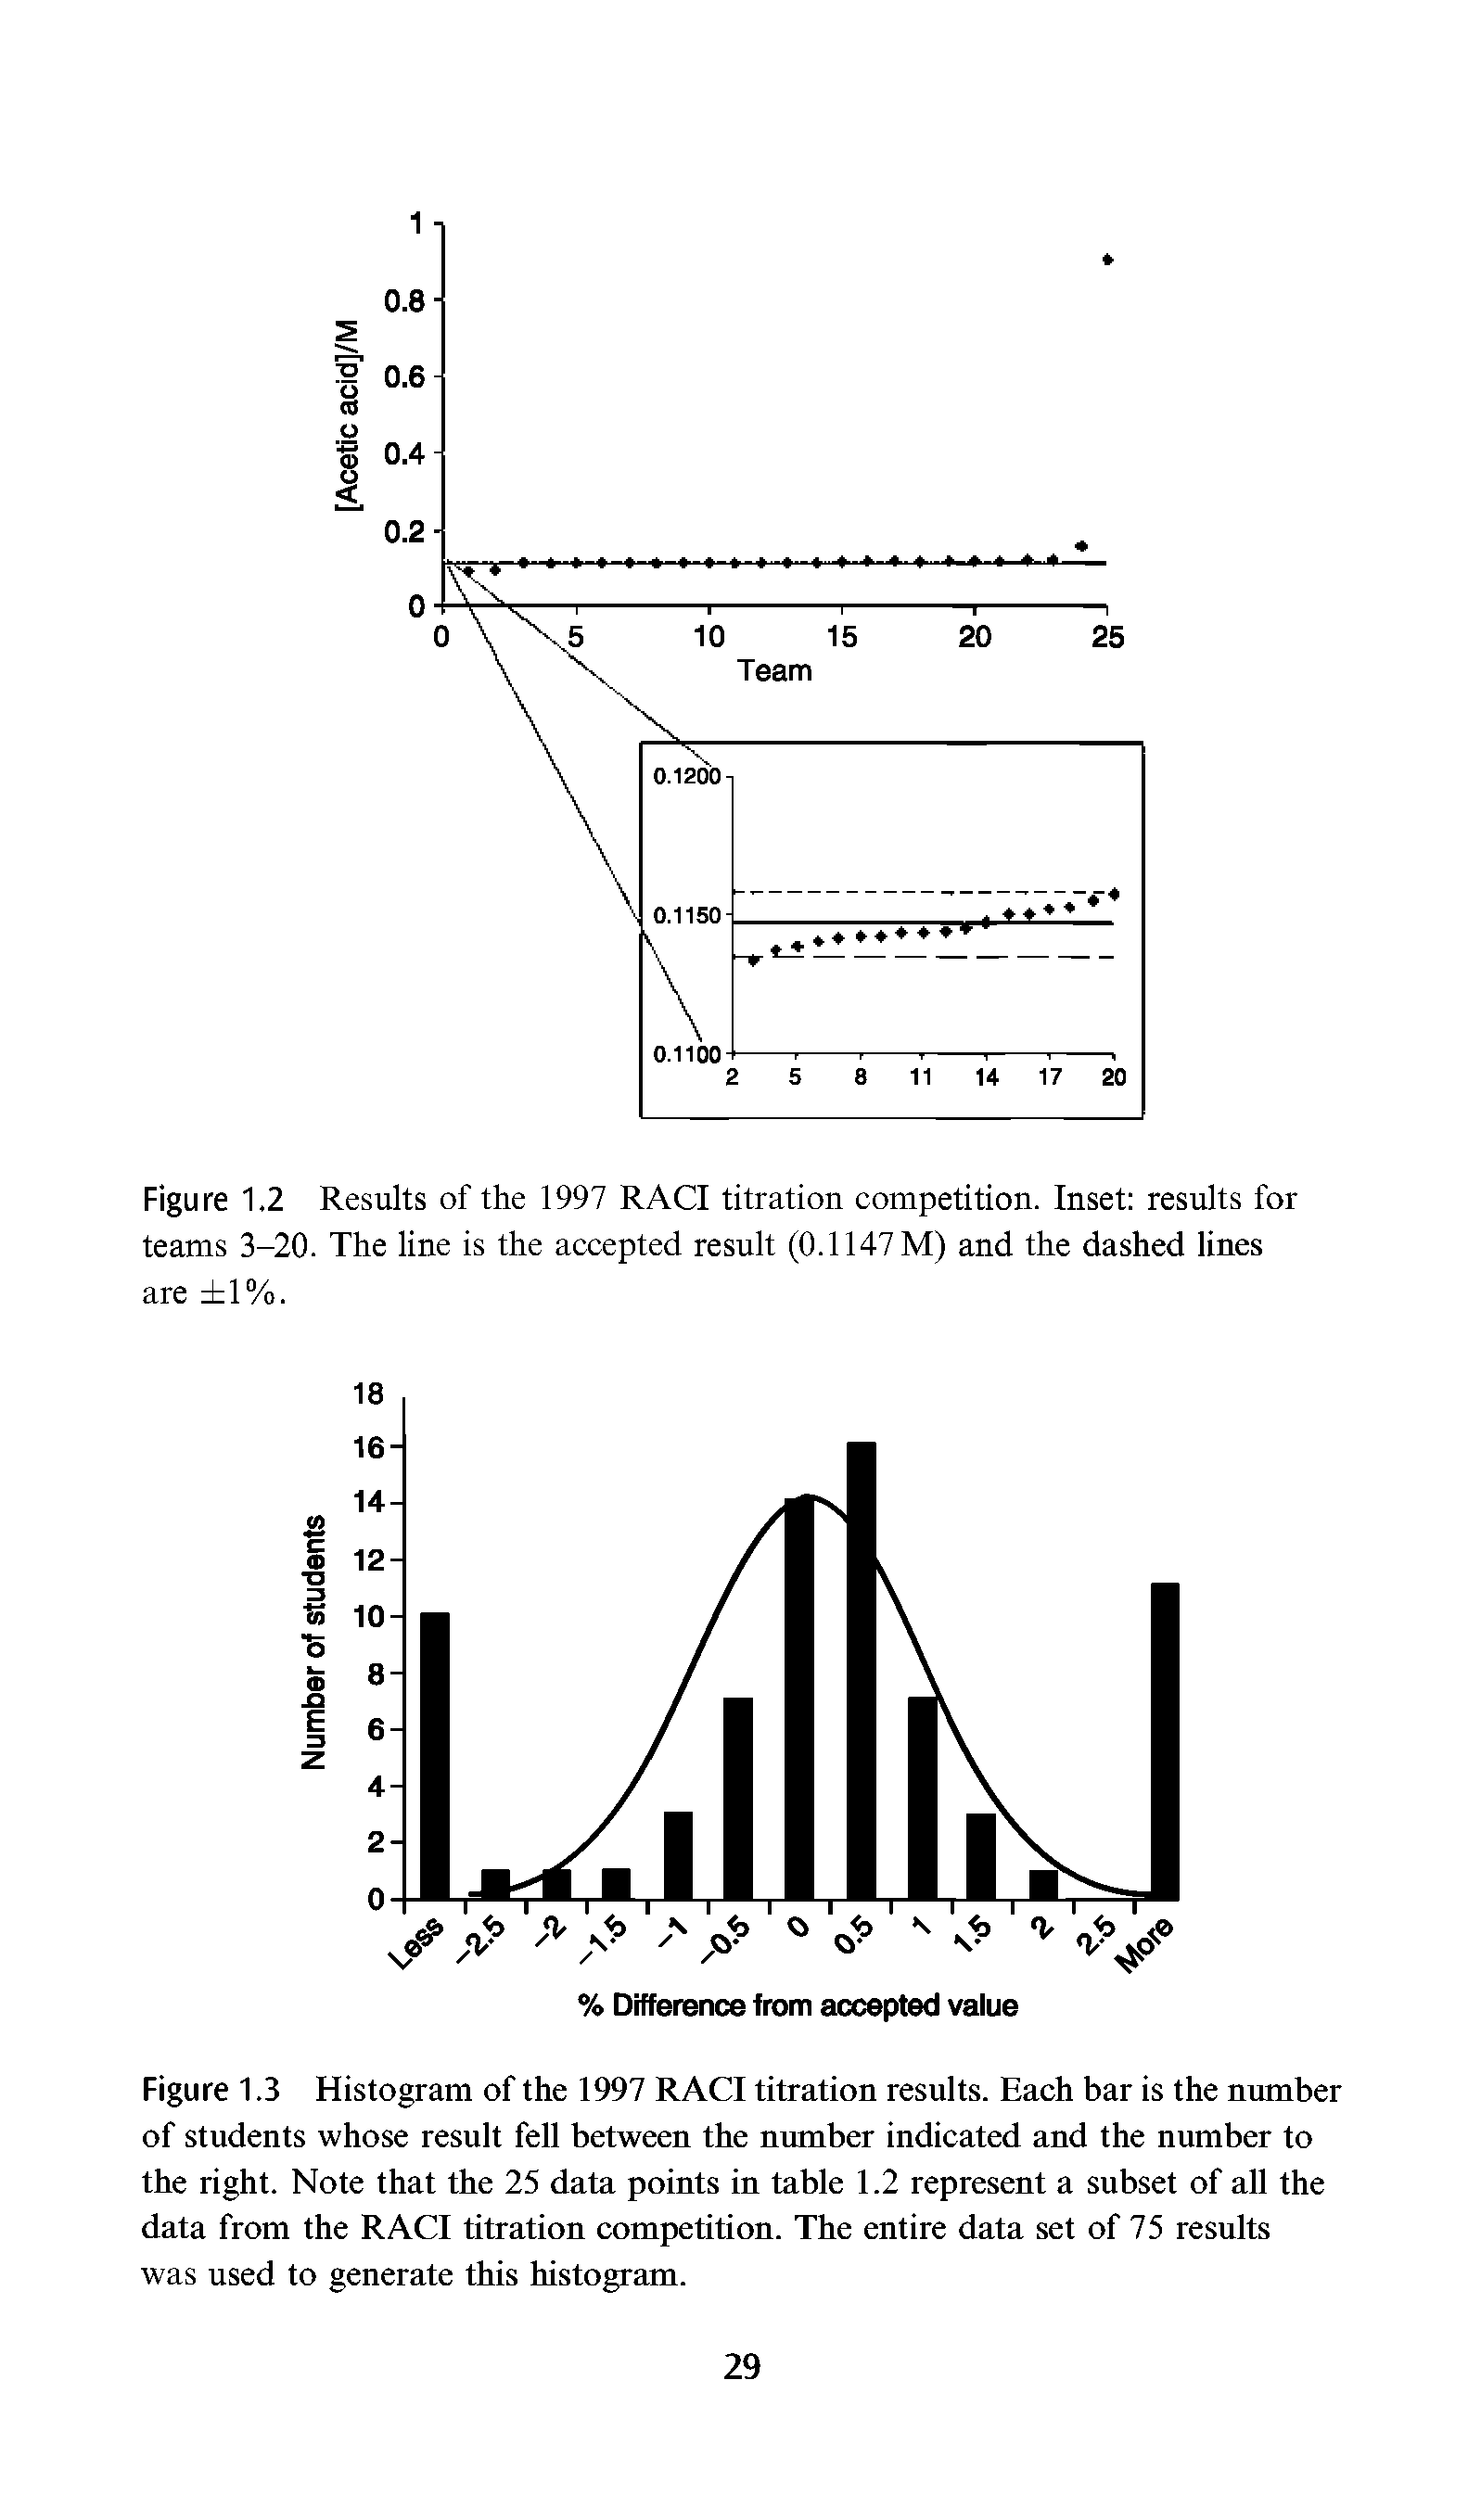 Figure 1.3 Histogram of the 1997 RACI titration results. Each bar is the number of students whose result fell between the number indicated and the number to the right. Note that the 25 data points in table 1.2 represent a subset of all the data from the RACI titration competition. The entire data set of 75 results was used to generate this histogram.